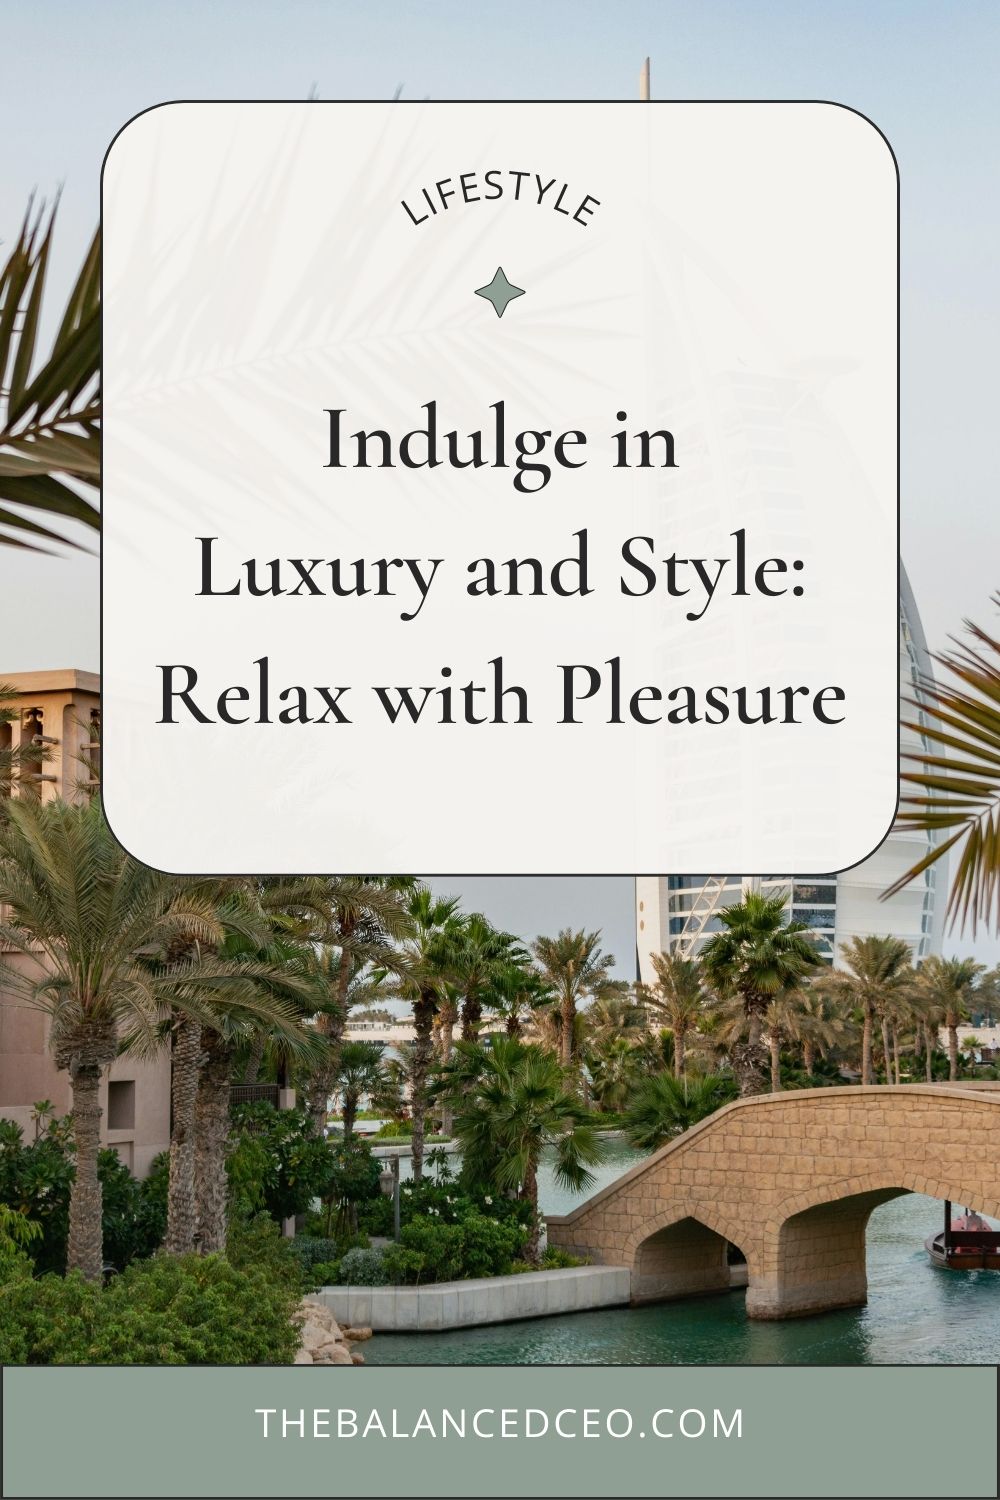 Indulge in Luxury and Style: Relax with Pleasure